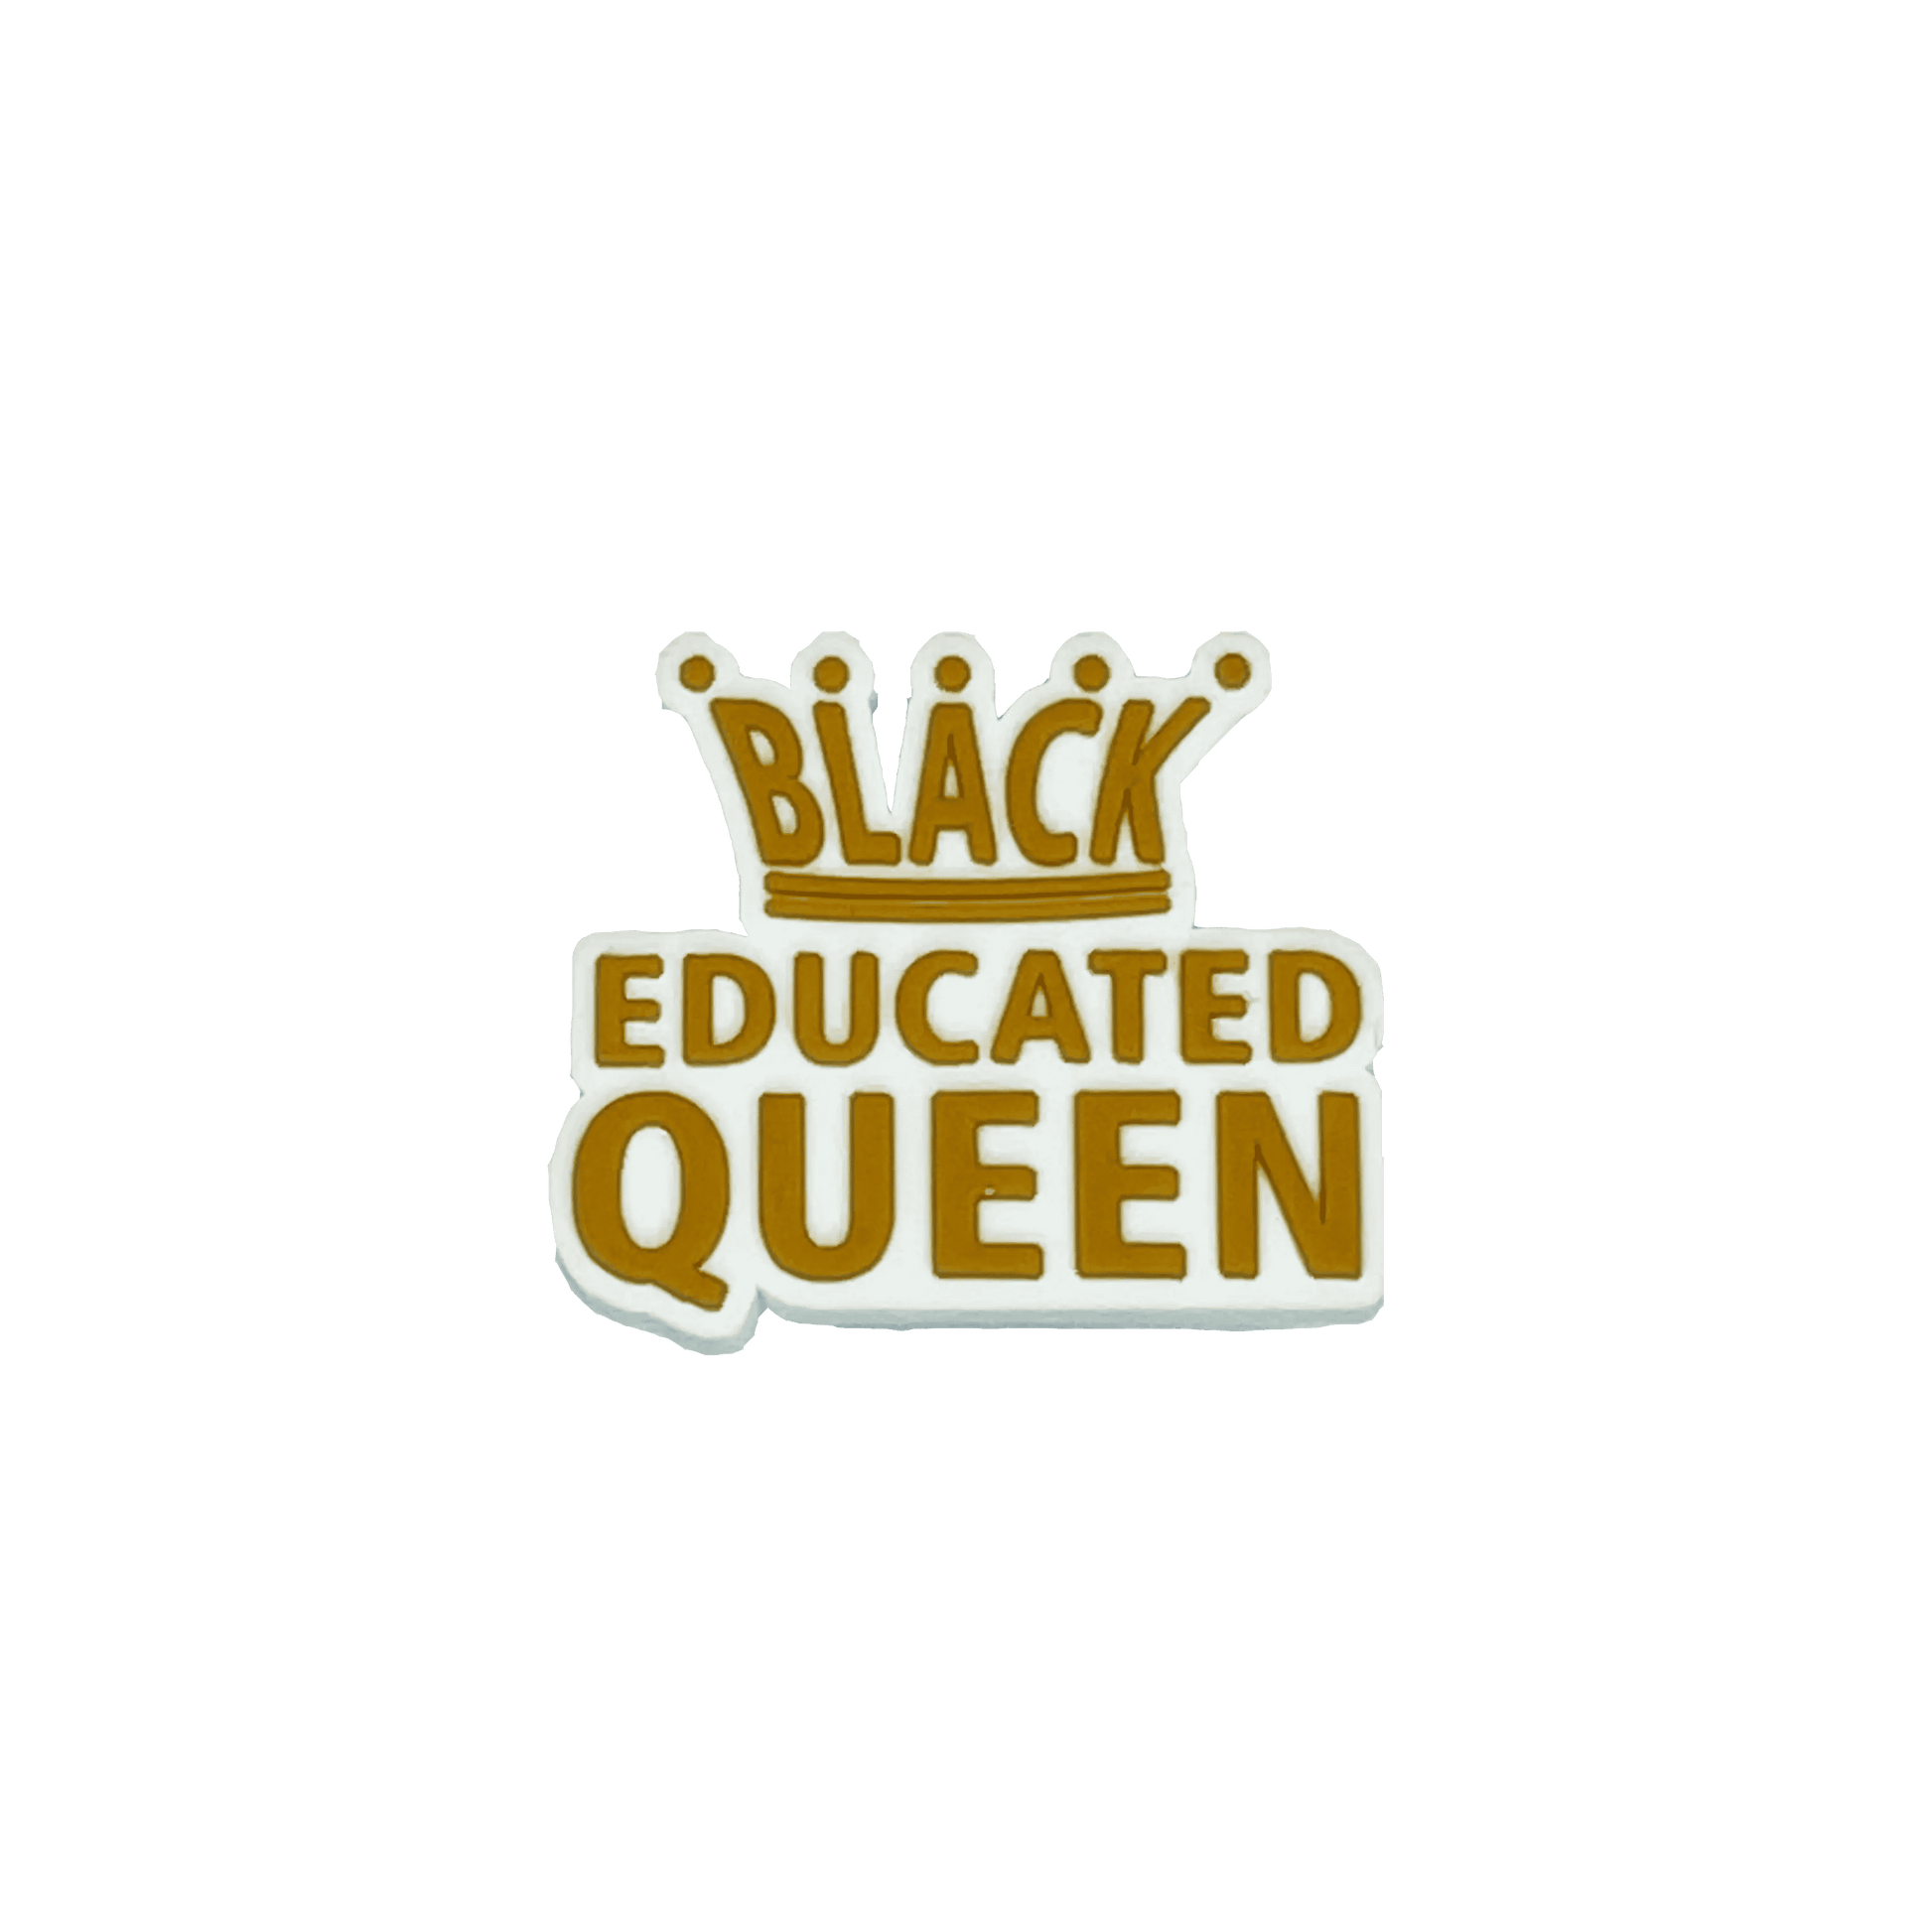 Black Educated Queen Charm Charms By Prince